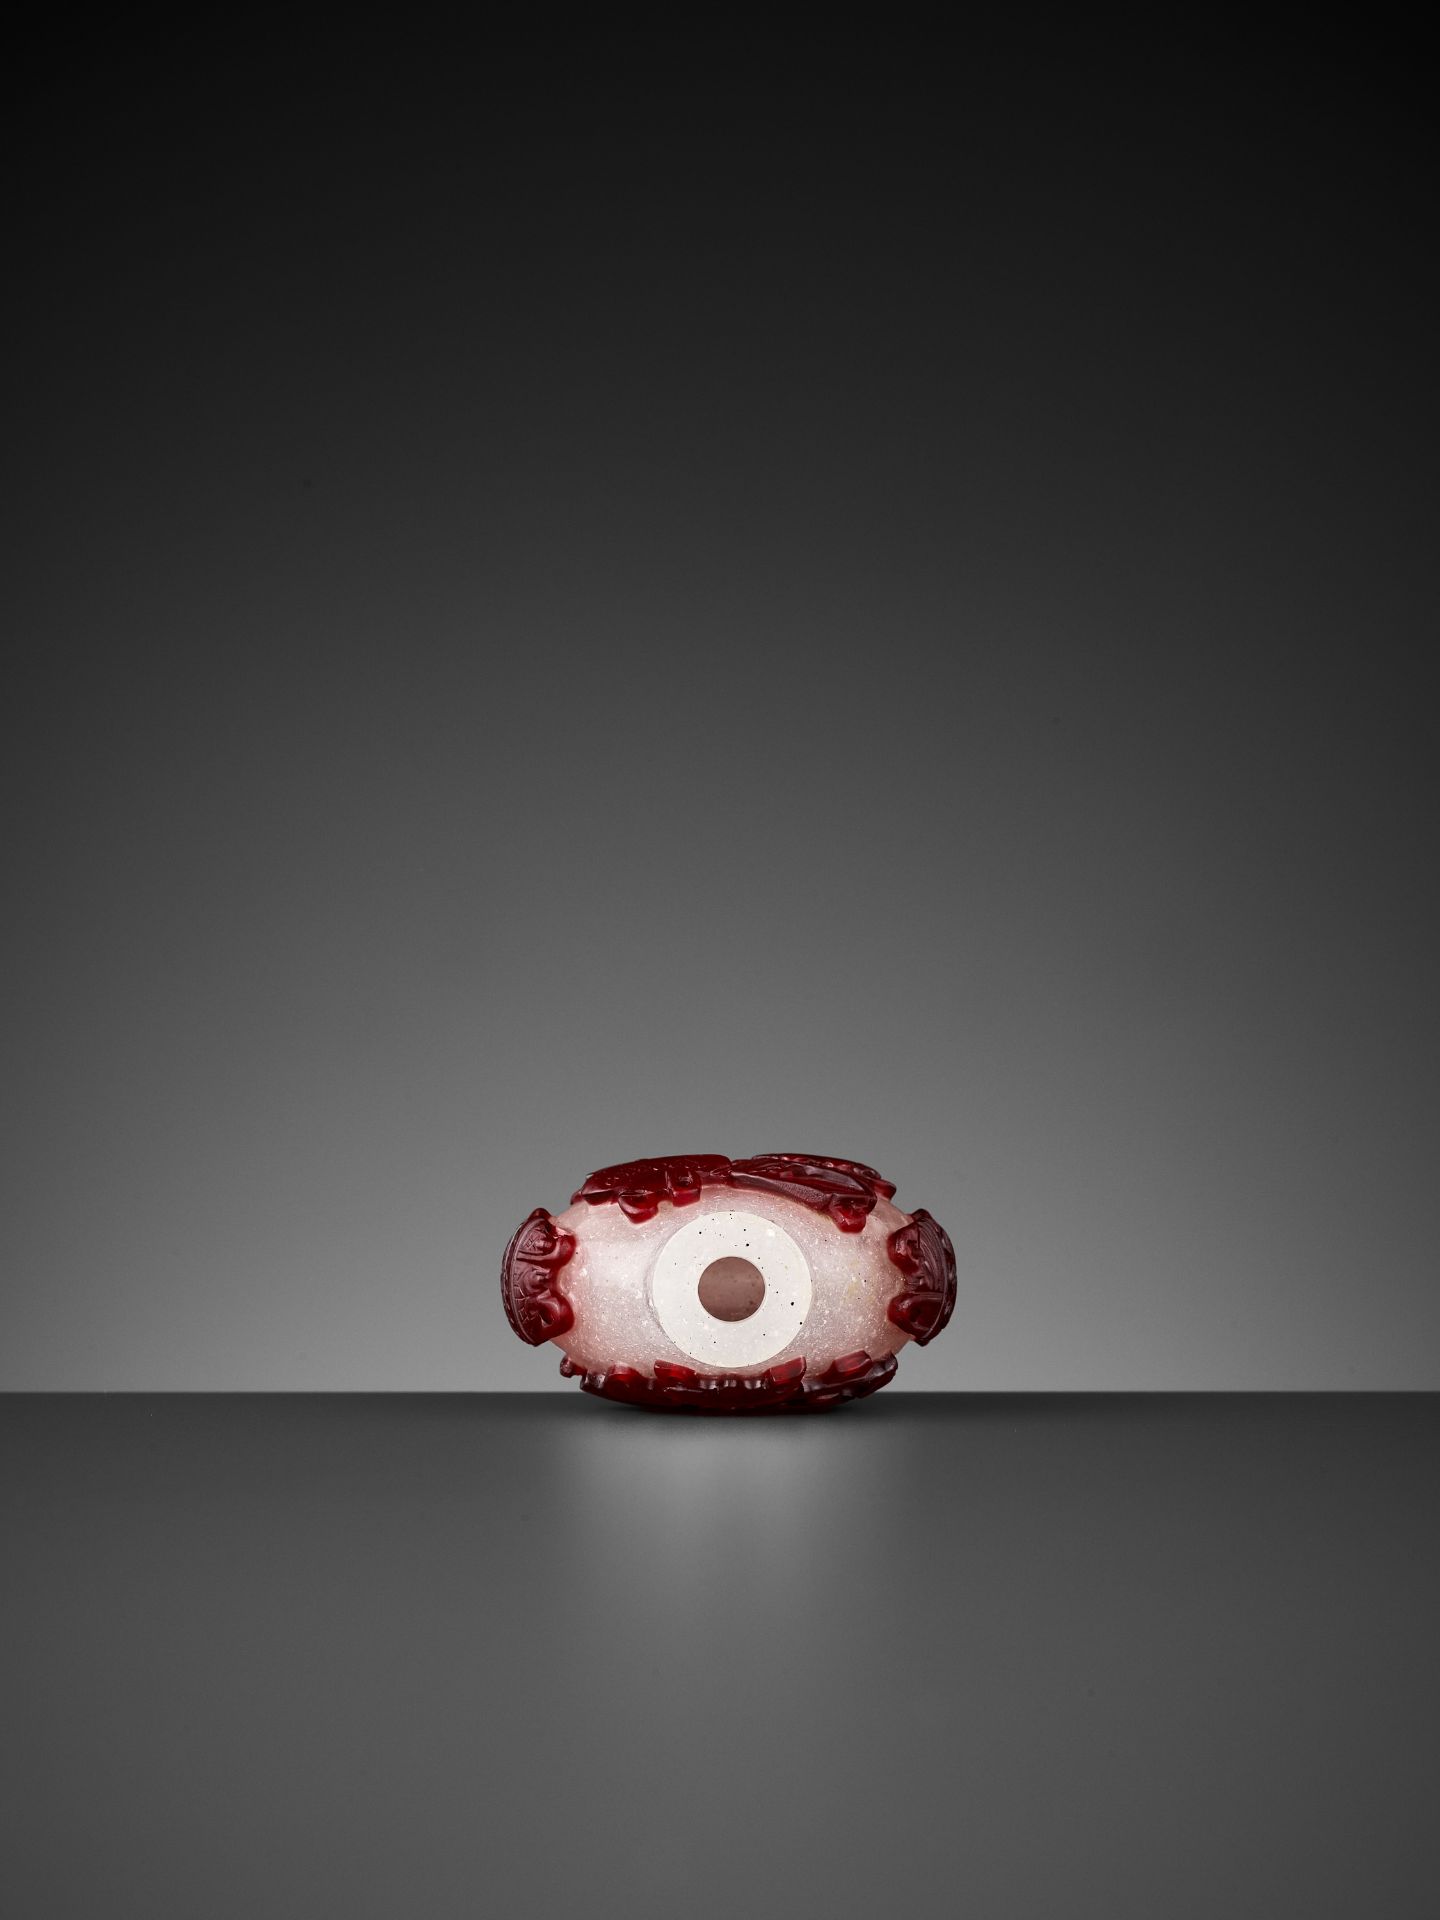 A RUBY-RED OVERLAY 'ANTIQUE TREASURES' GLASS SNUFF BOTTLE, QING DYNASTY - Image 6 of 7